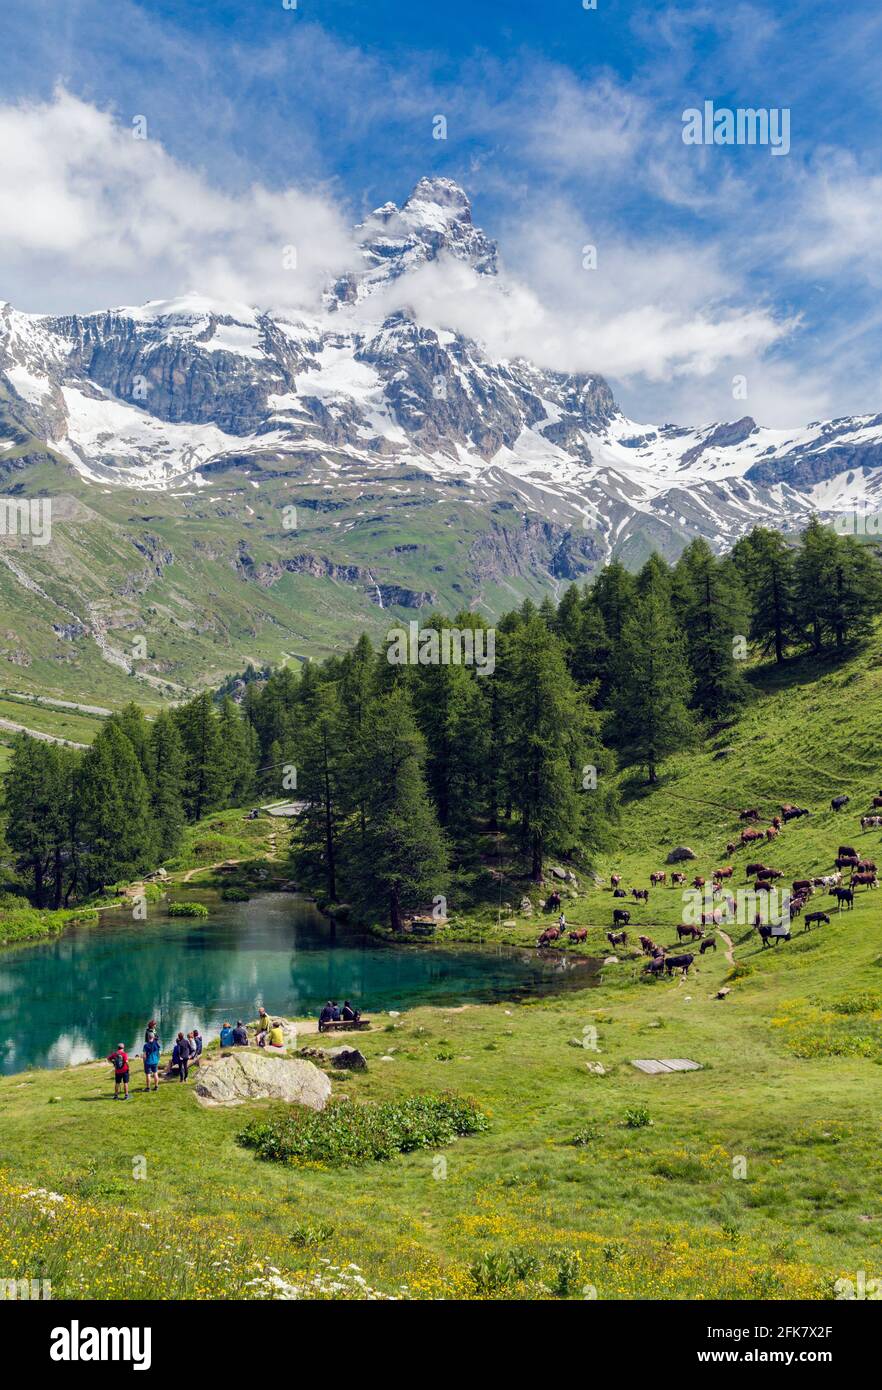 near Valtournenche, Aosta Province, Aosta, Italy.  The Blue Lake (Lago Blu) with the Matterhorn in the background.  The Matterhorn straddles the borde Stock Photo